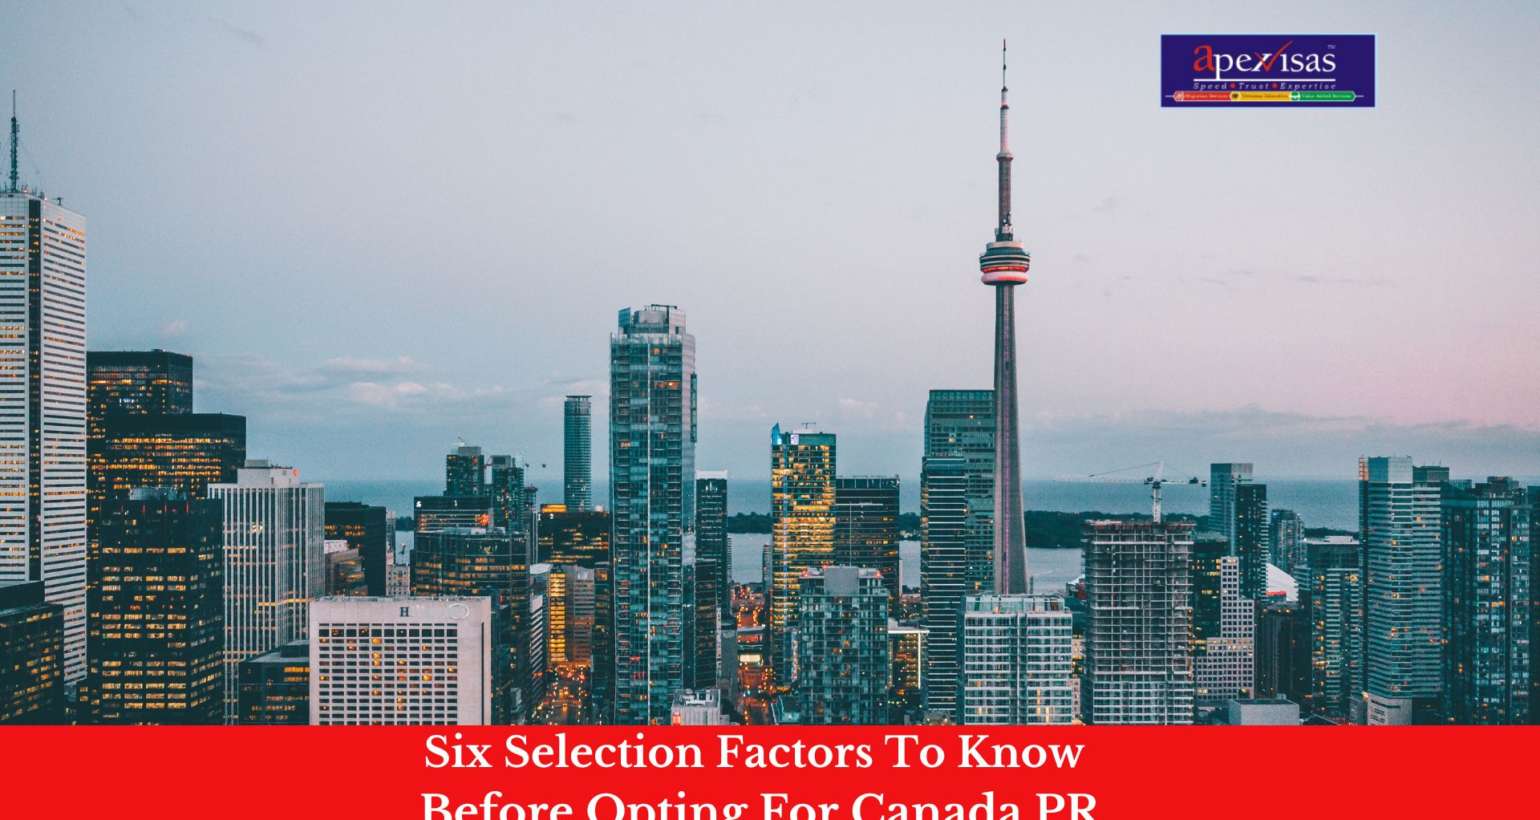 Six Selection Factors One Needs To Know Before Opting For Canada PR